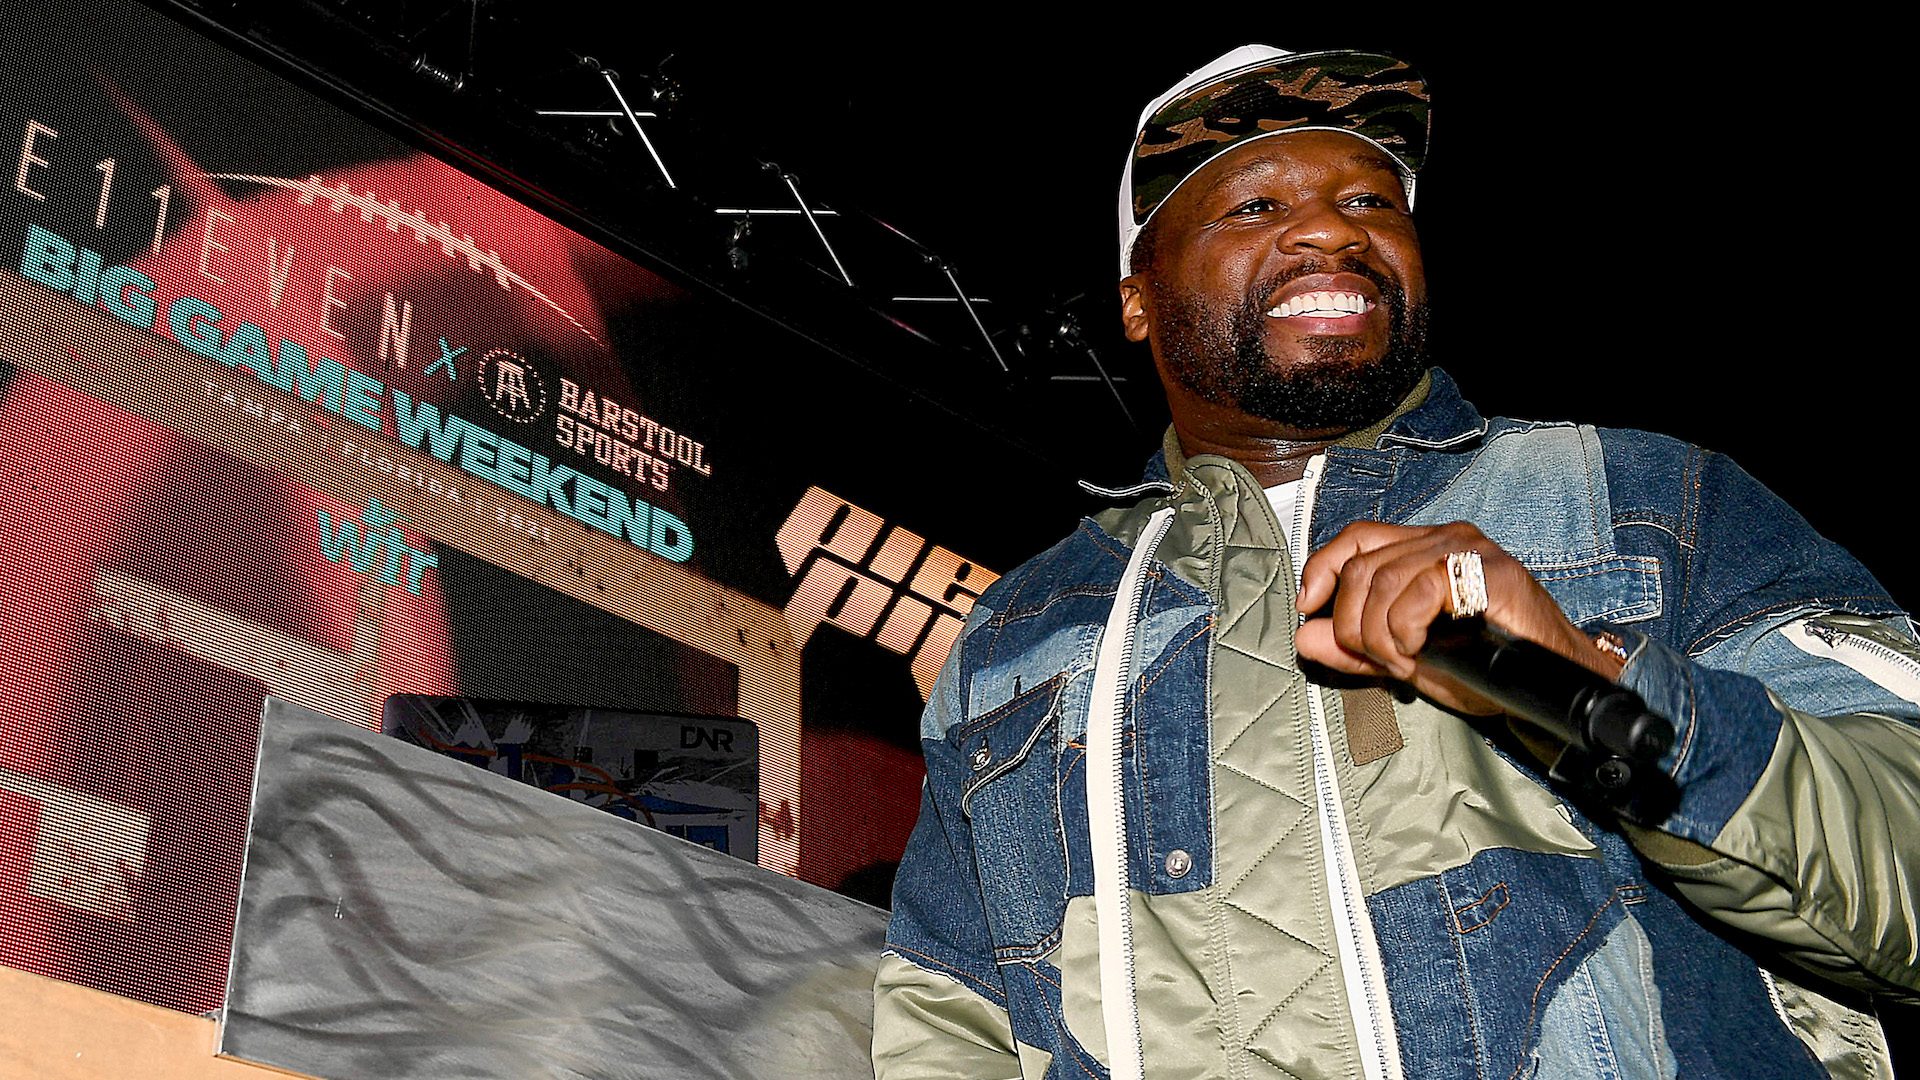 Florida Mayor Slams 50 Cent for Super Bowl Party